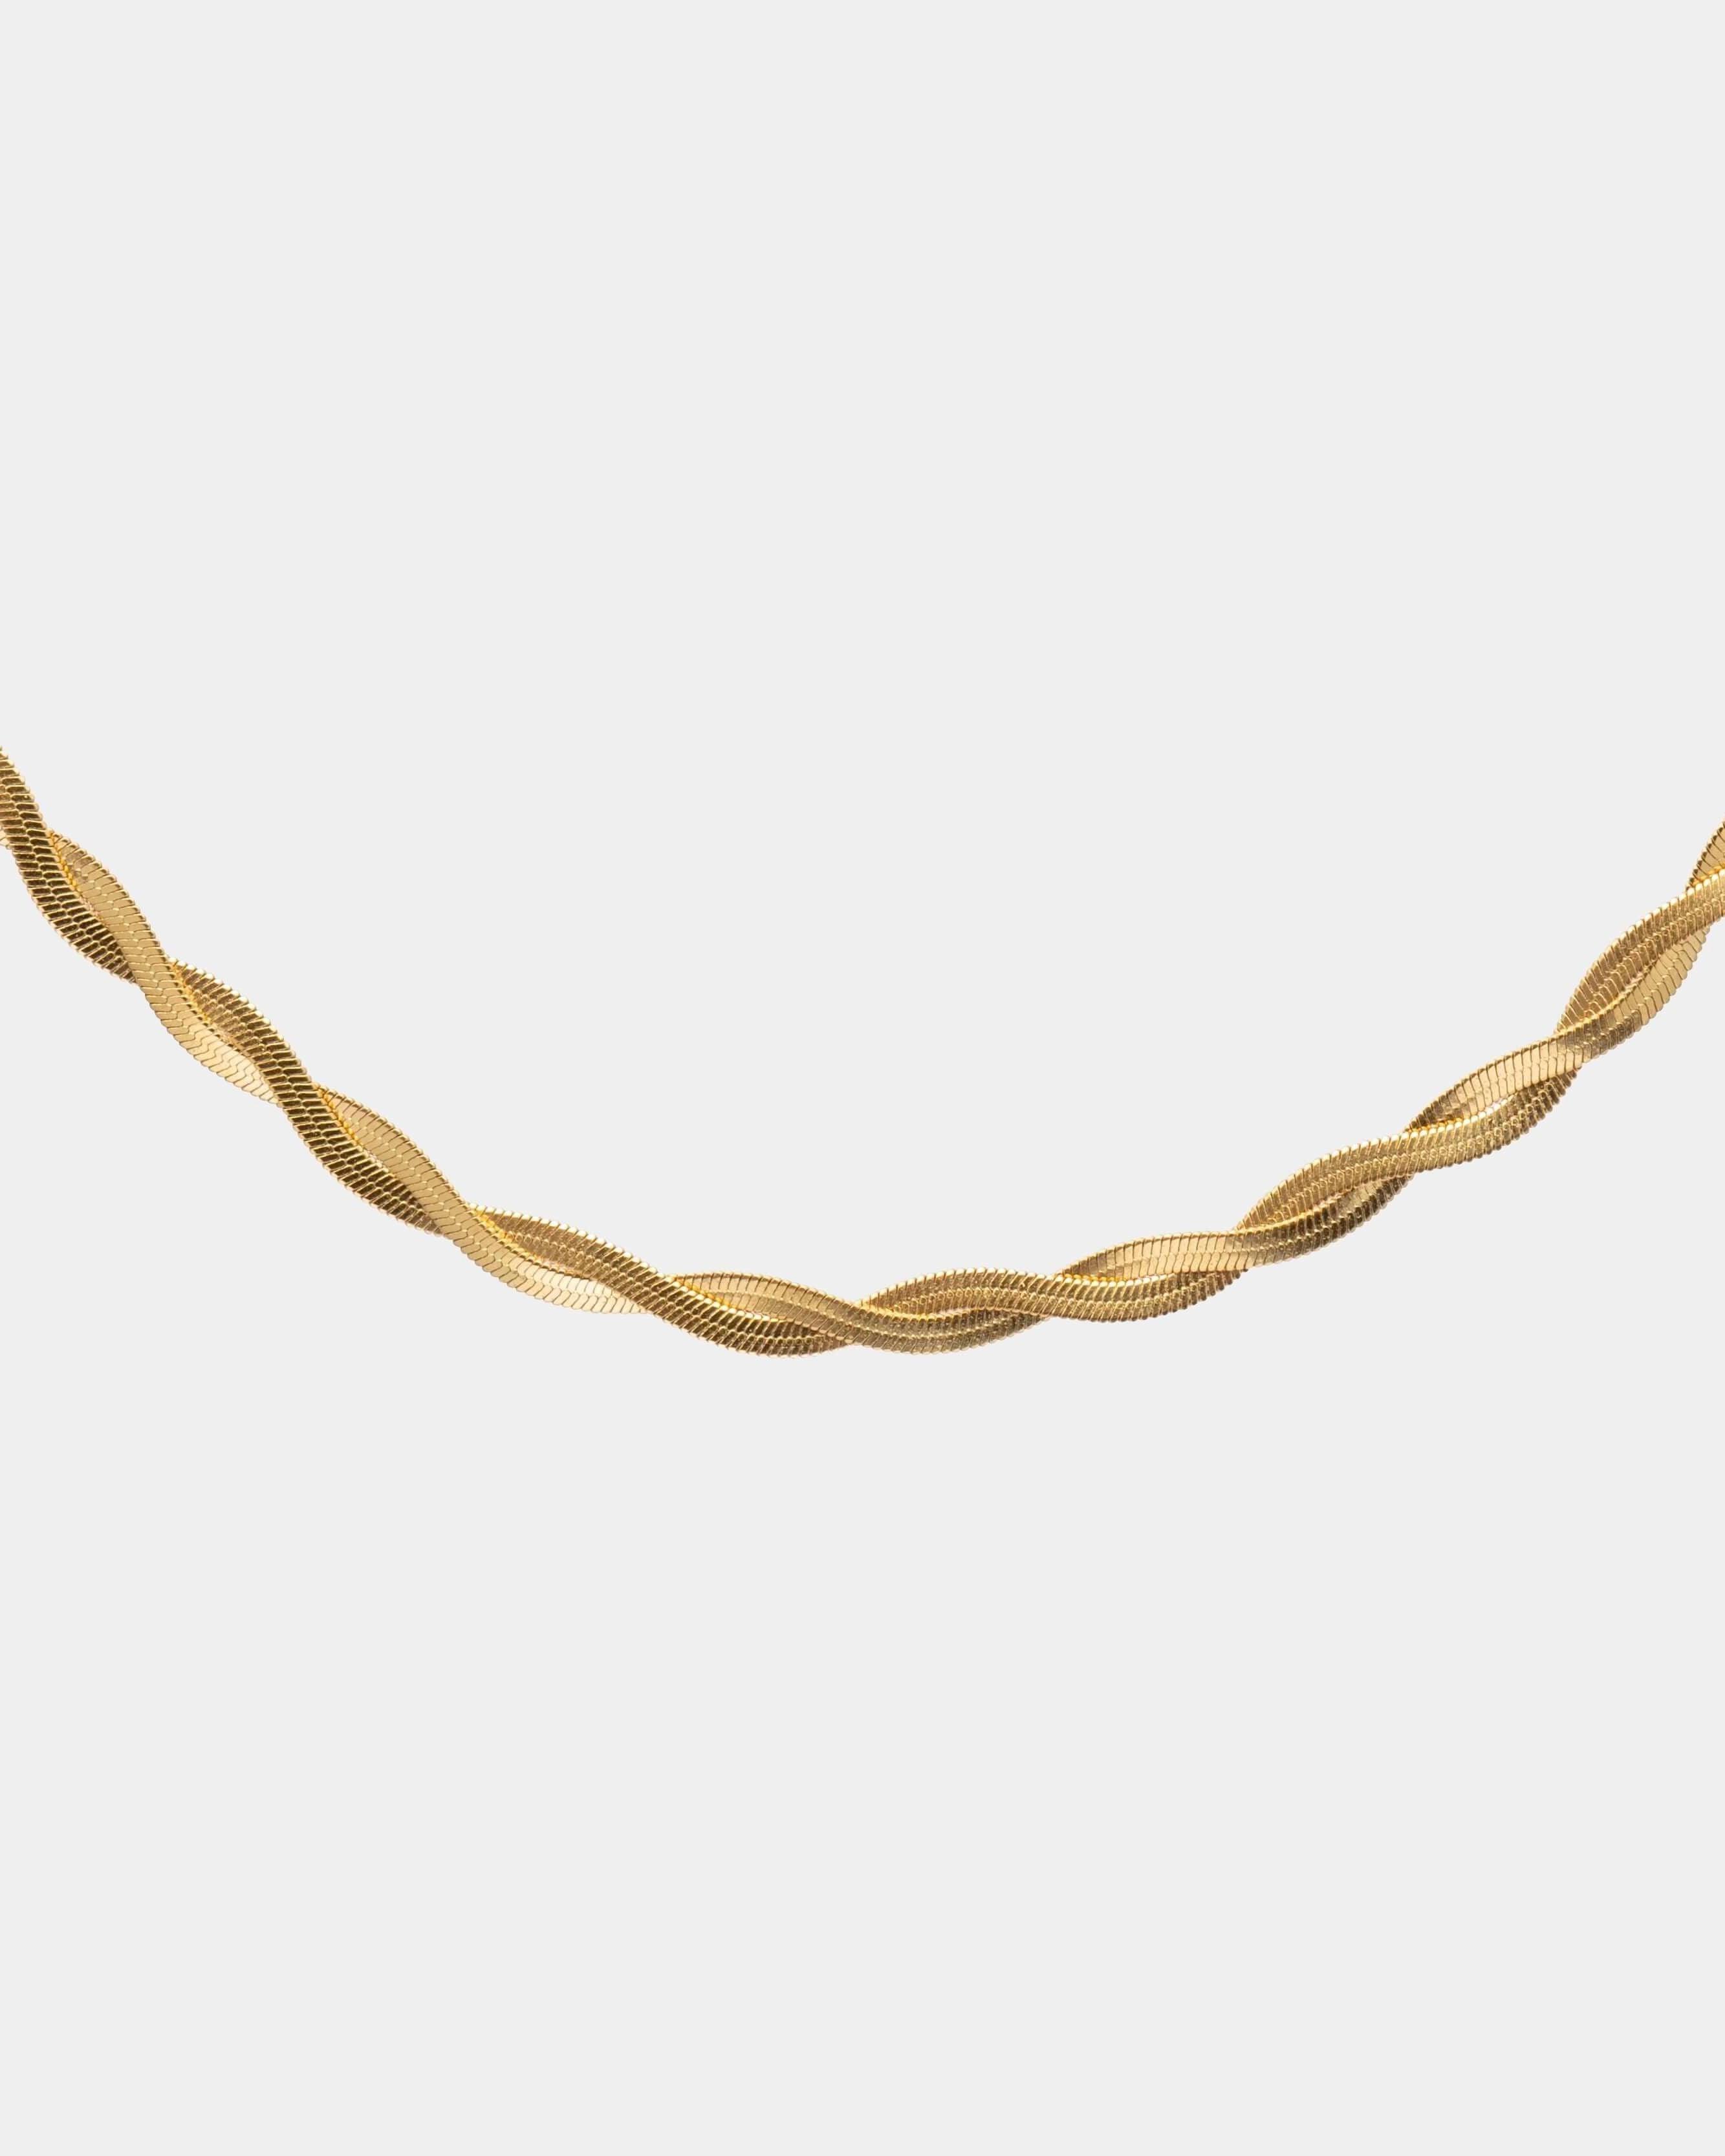 INTERTWINED NECKLACE - LIMELY